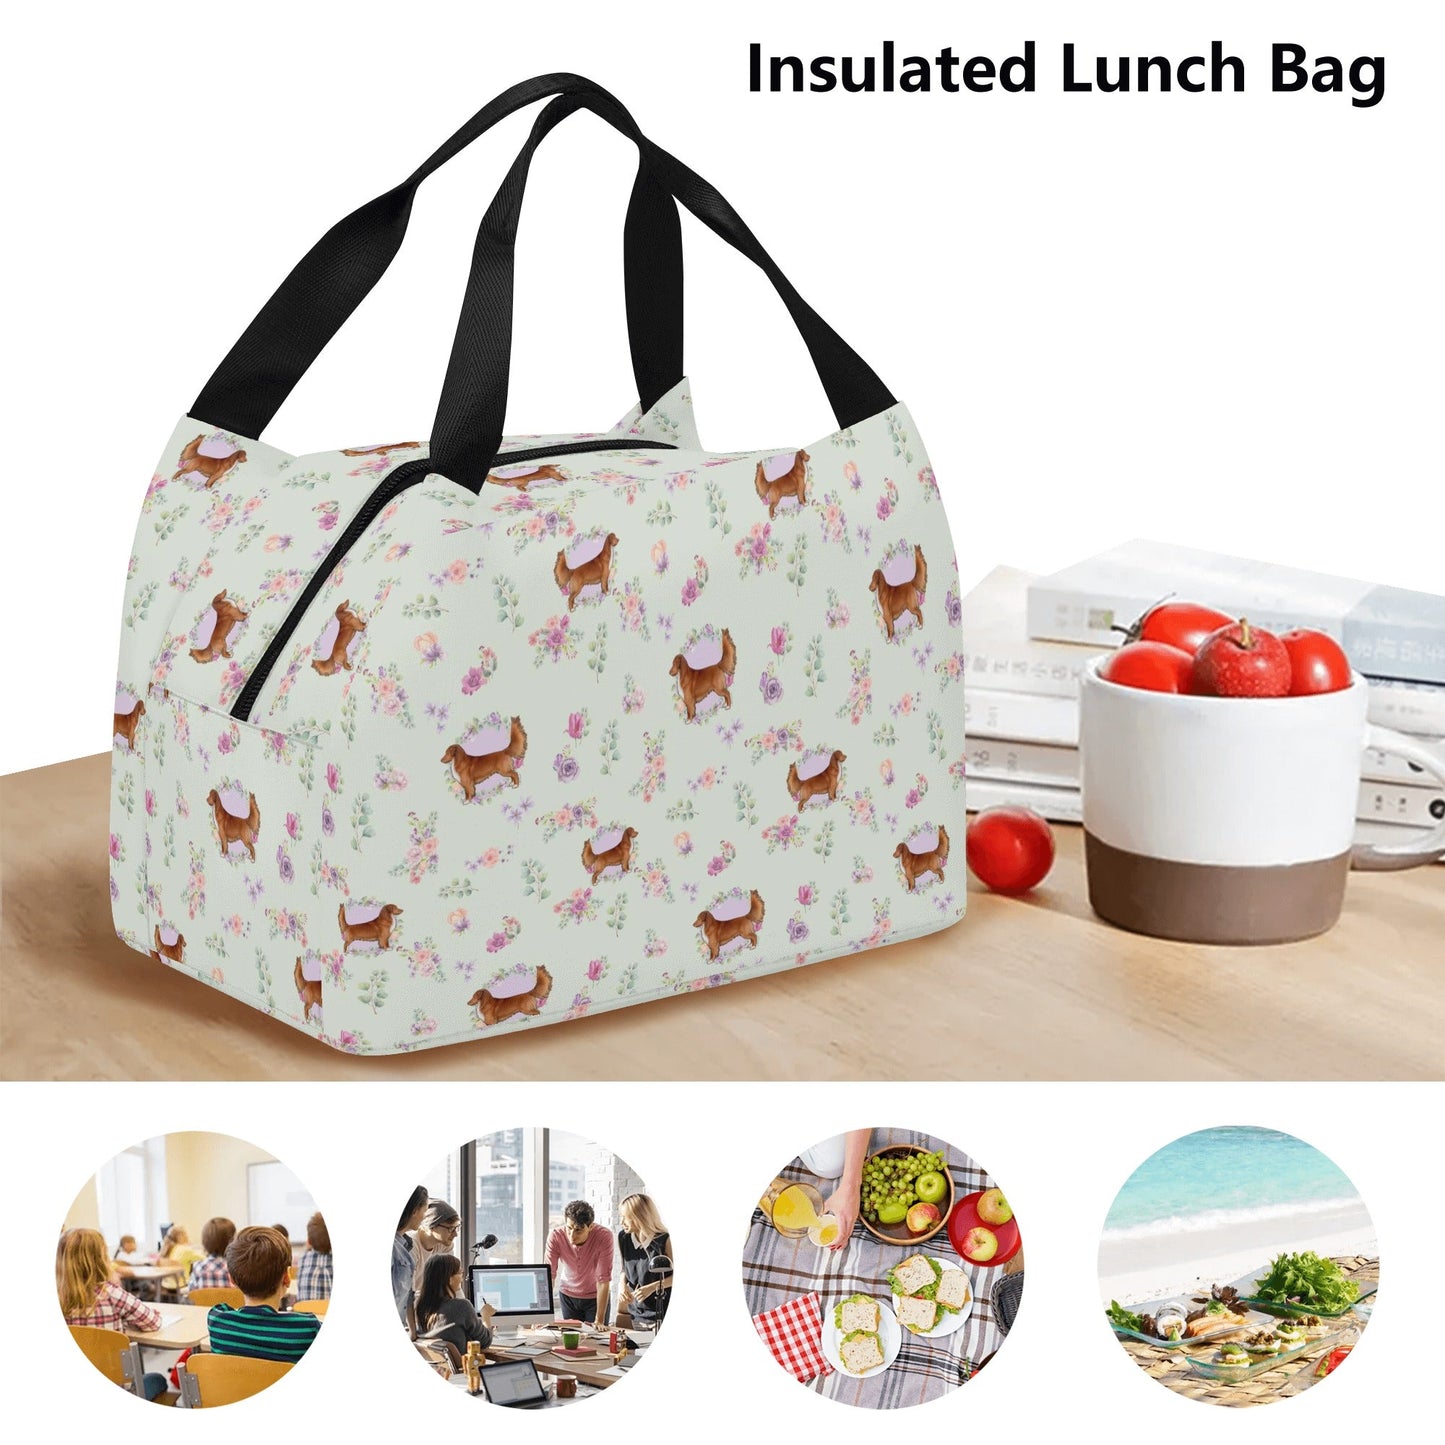 Ringside Lunch/Bait Tote